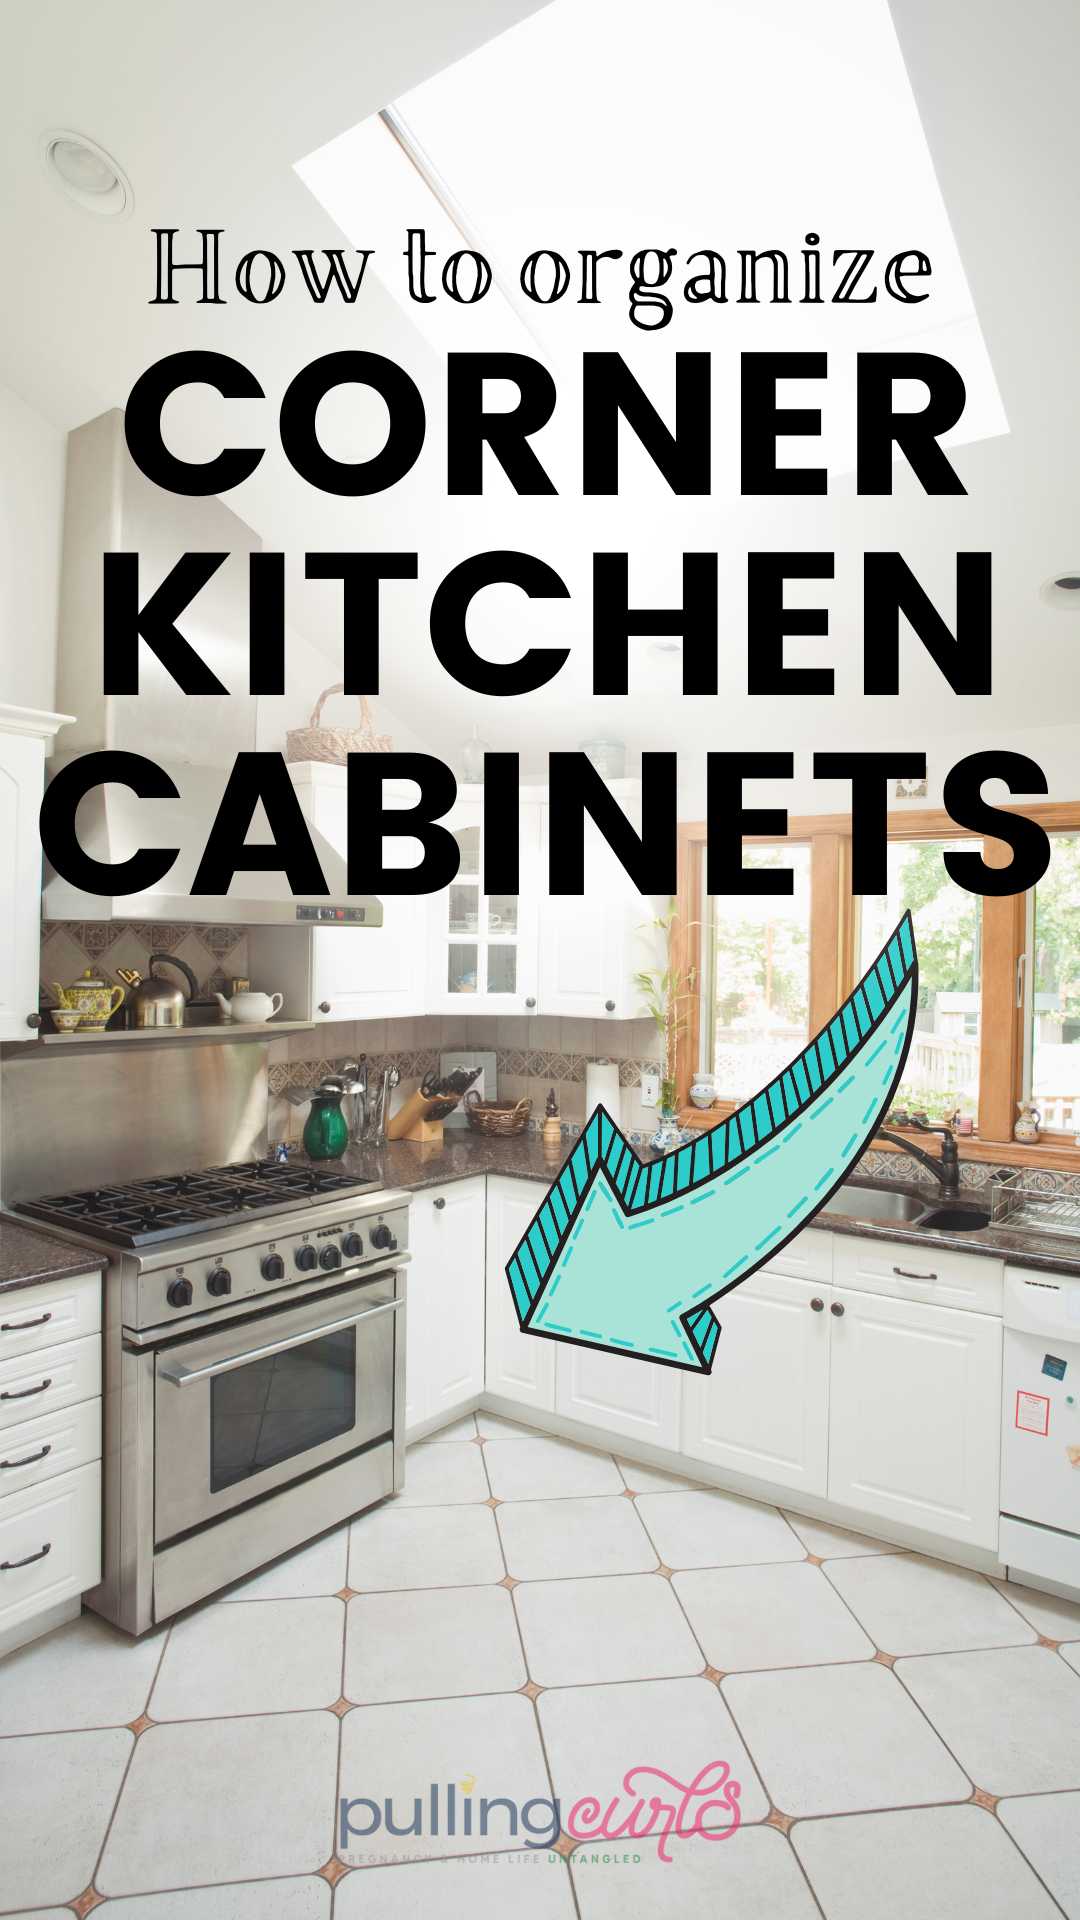 How to Organize Corner Kitchen Cabinets (5 Great Ideas to Consider)   Corner kitchen cabinet, How to organize corner kitchen cabinet, Cupboards  organization